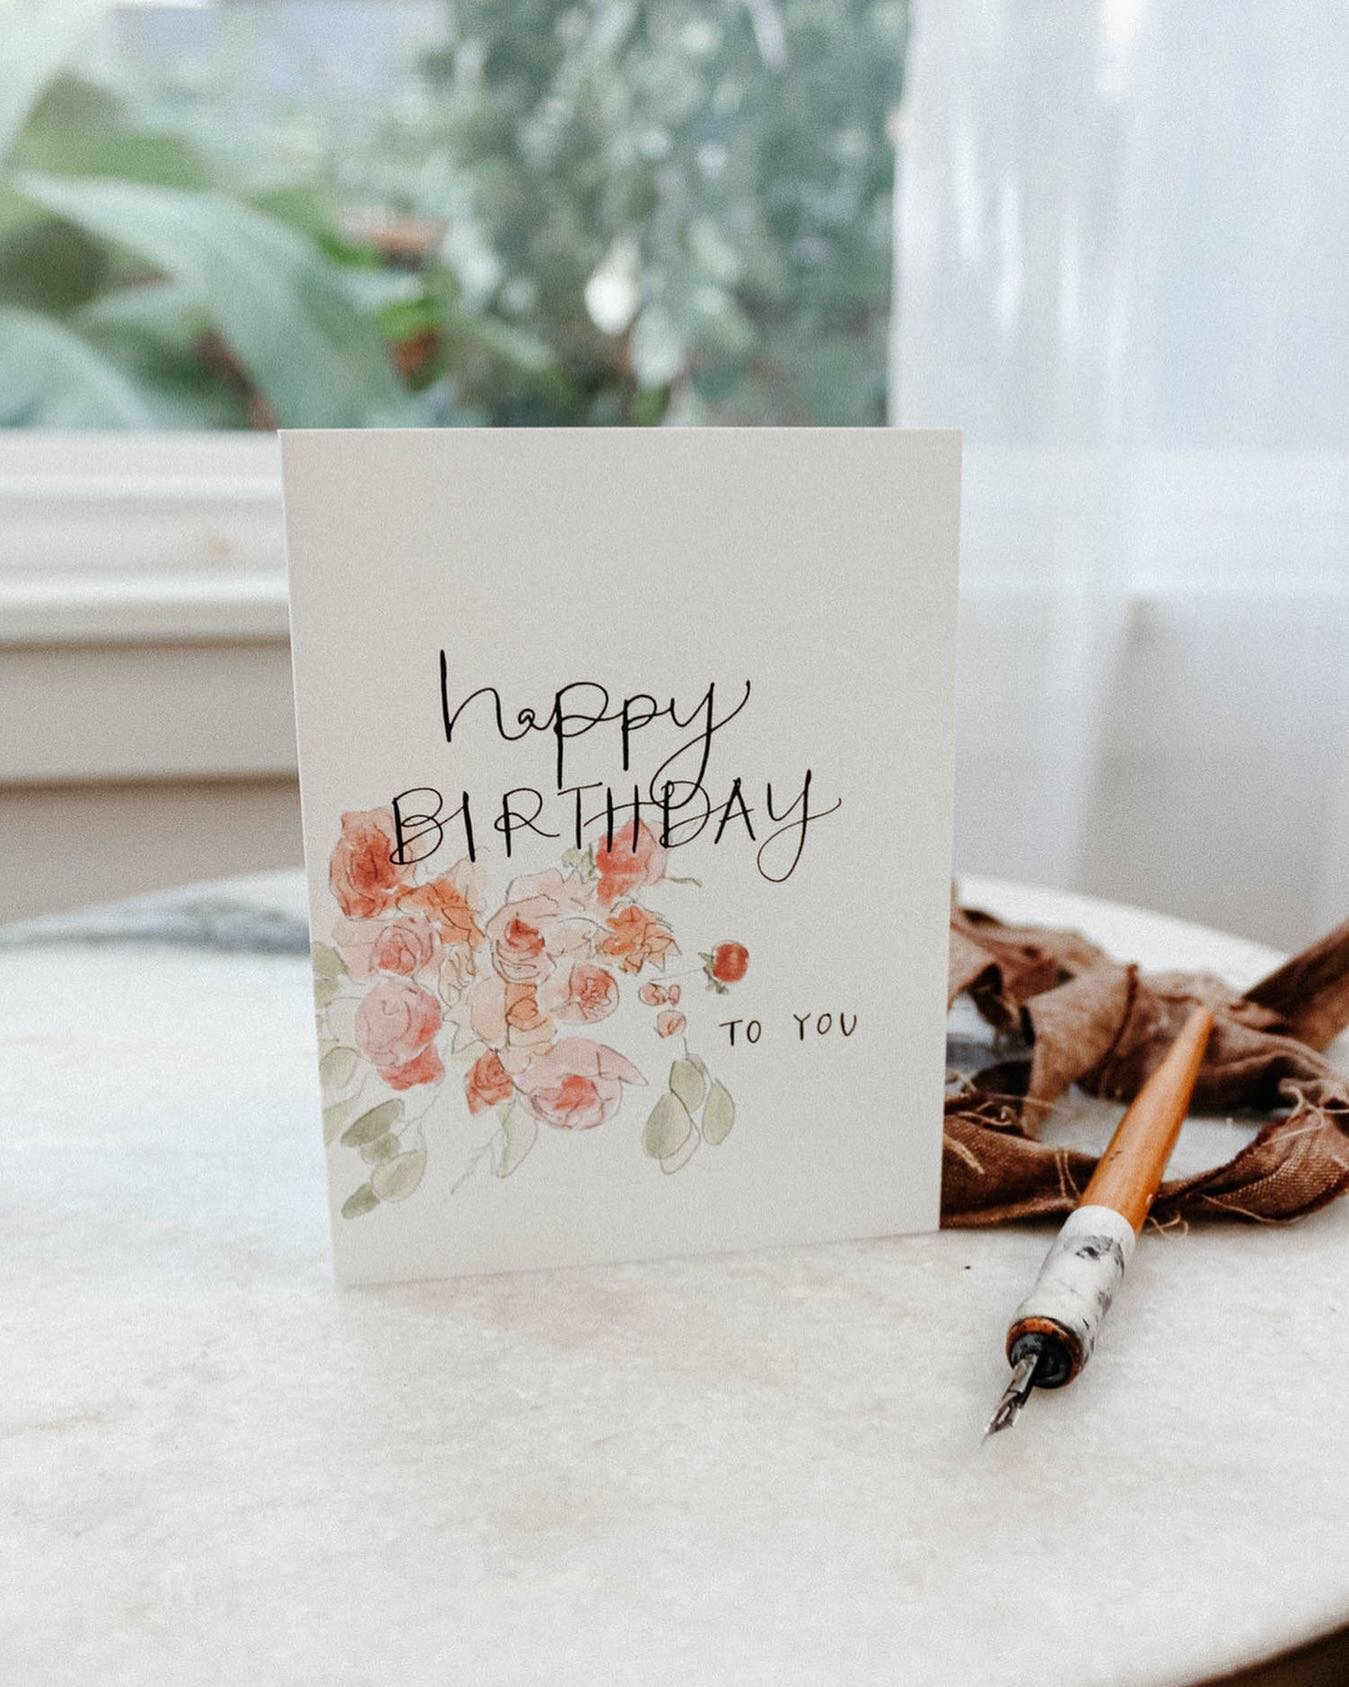 simple &amp; sweet &mdash; 
⠀⠀⠀⠀⠀⠀⠀⠀⠀
this is one my earliest birthday card designs, but it&rsquo;s still a fan favorite around here which is so fun to see! 😍
⠀⠀⠀⠀⠀⠀⠀⠀⠀
#greetingcards